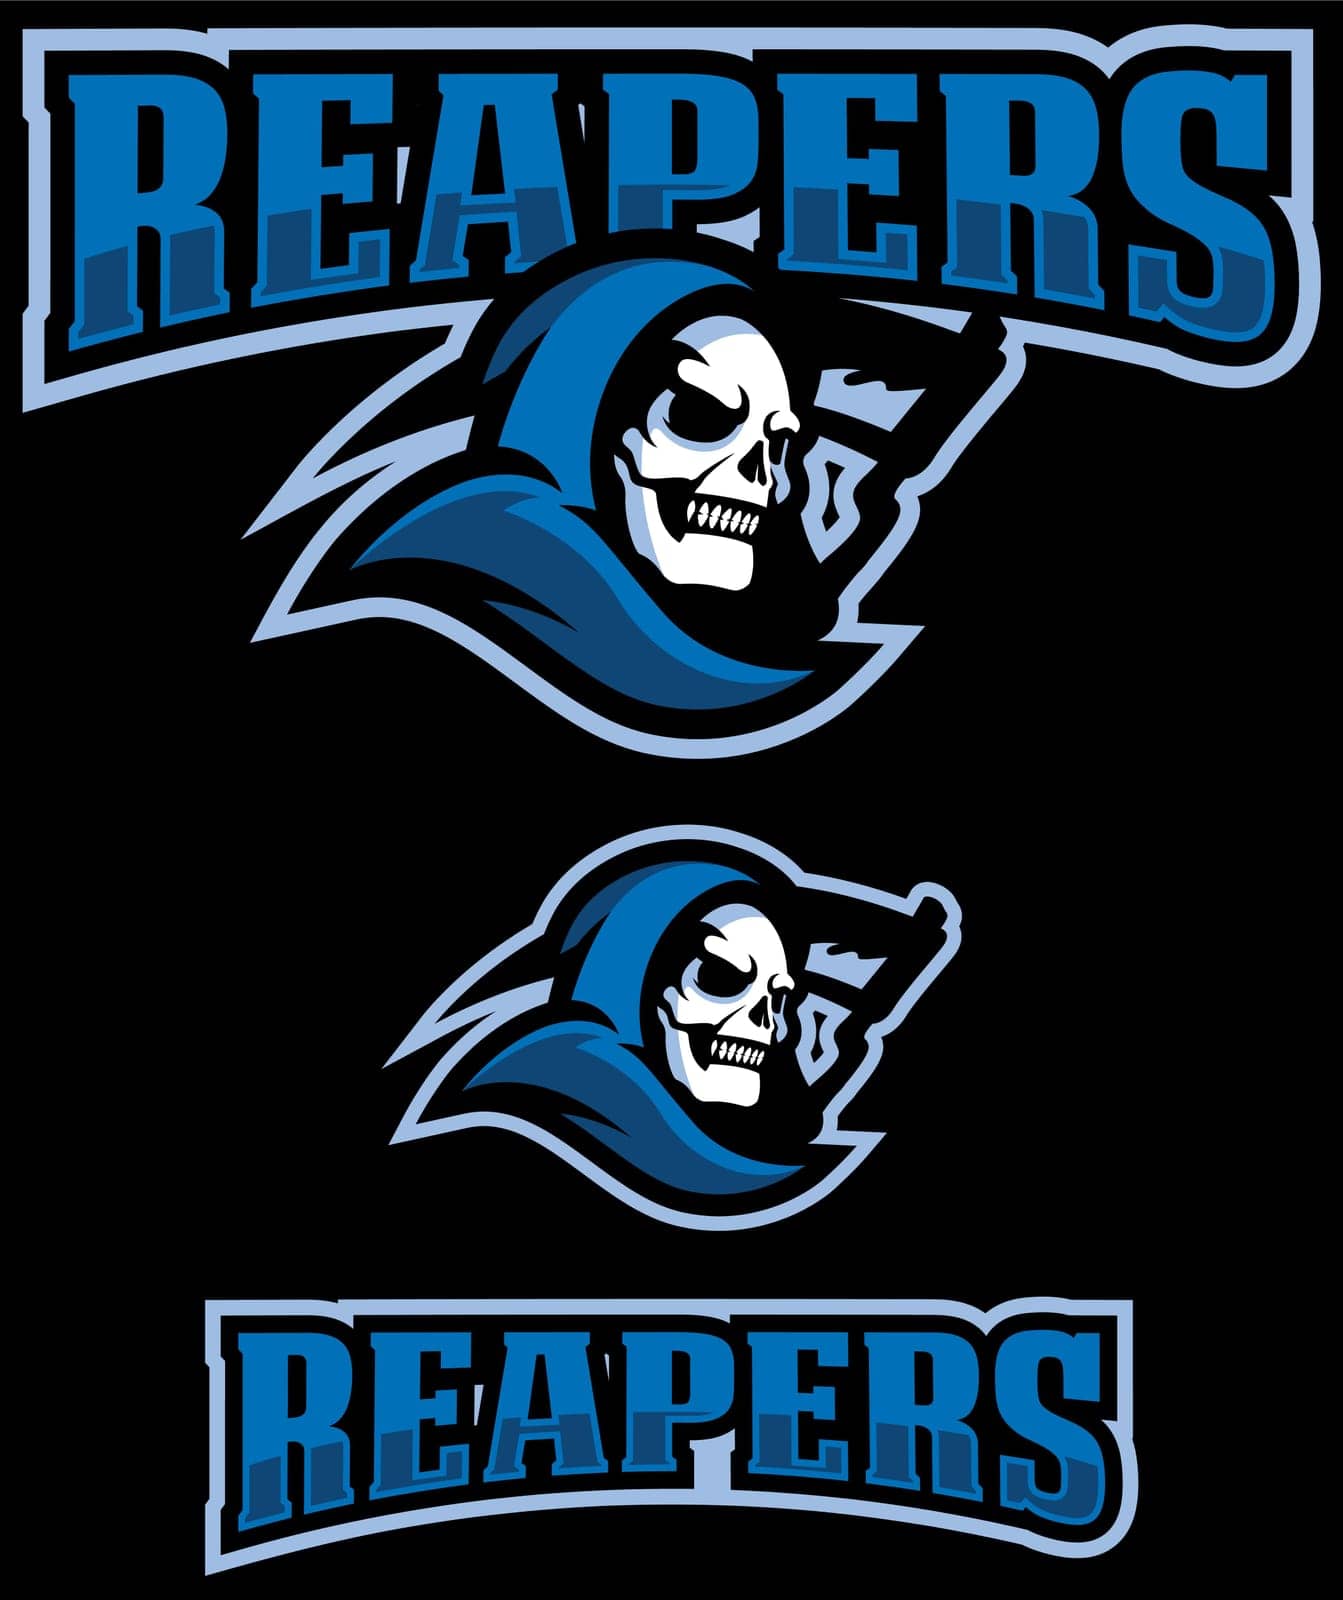 Reapers Mascot by Malchev